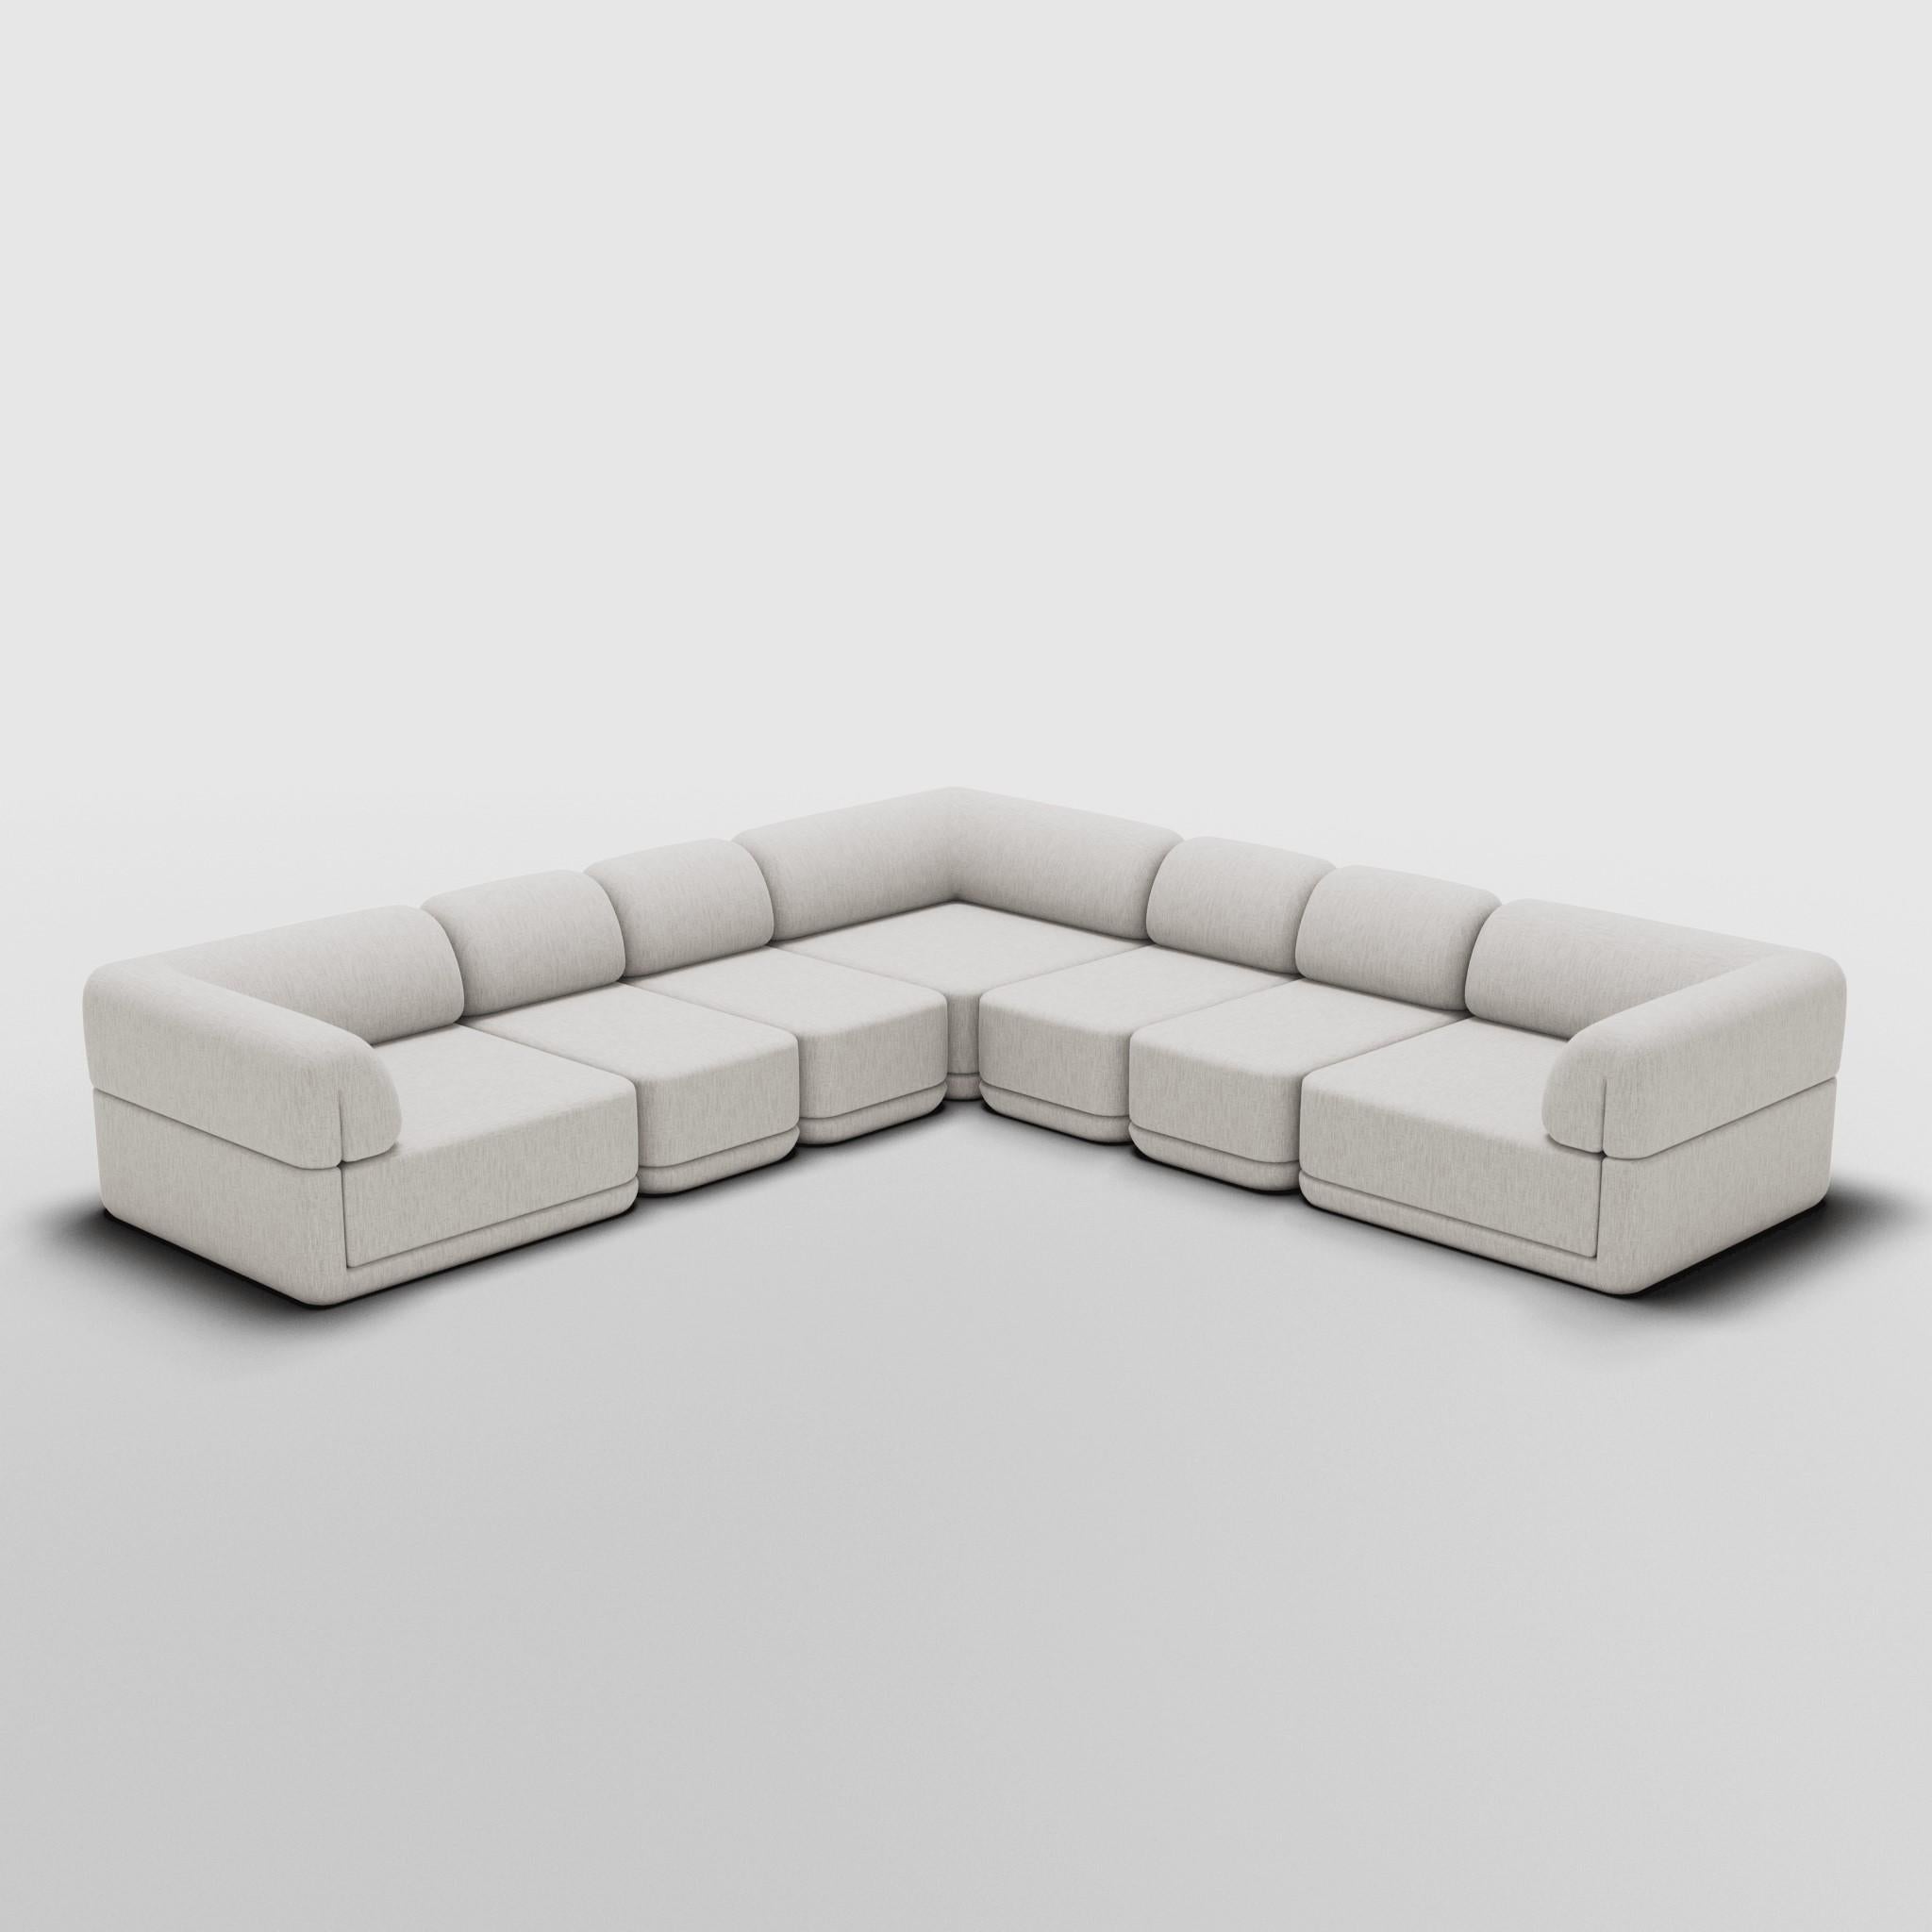 Mid-Century Modern The Cube Sofa - Corner Slim Sectional For Sale